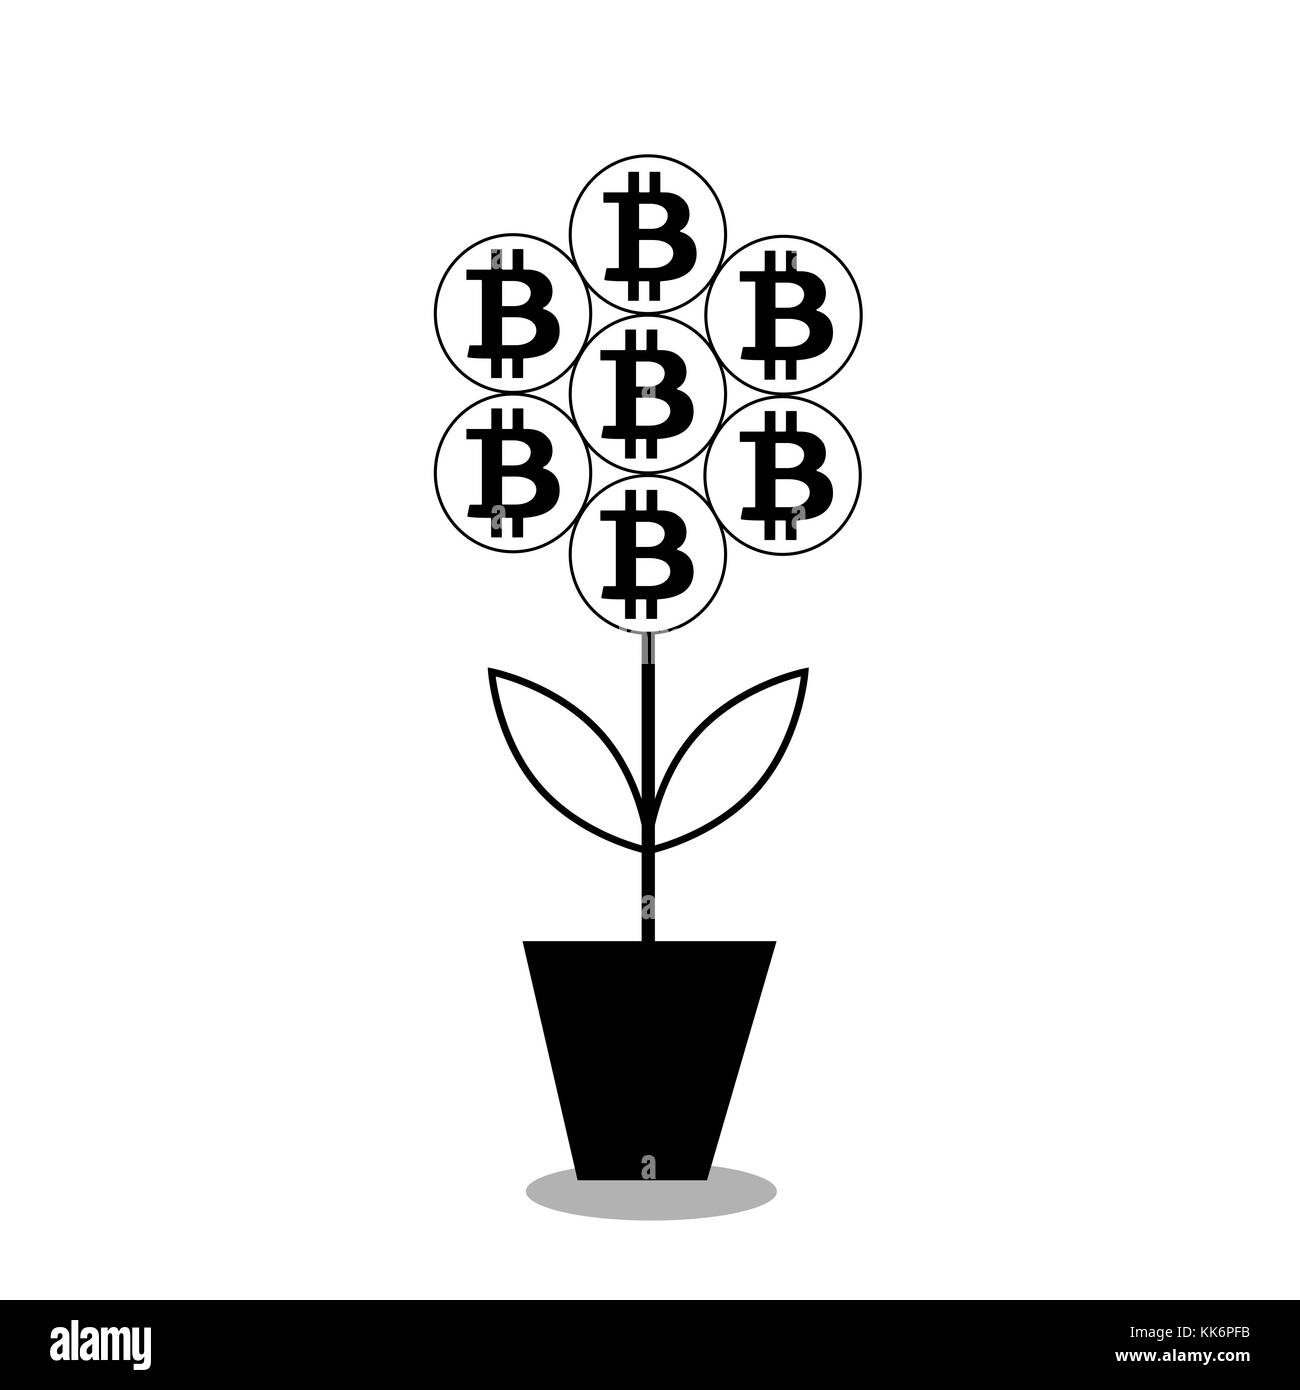 vector illustration of bitcoin flower in the pot. black silhouette, icon, clip art isolated on white background. Stock Photo